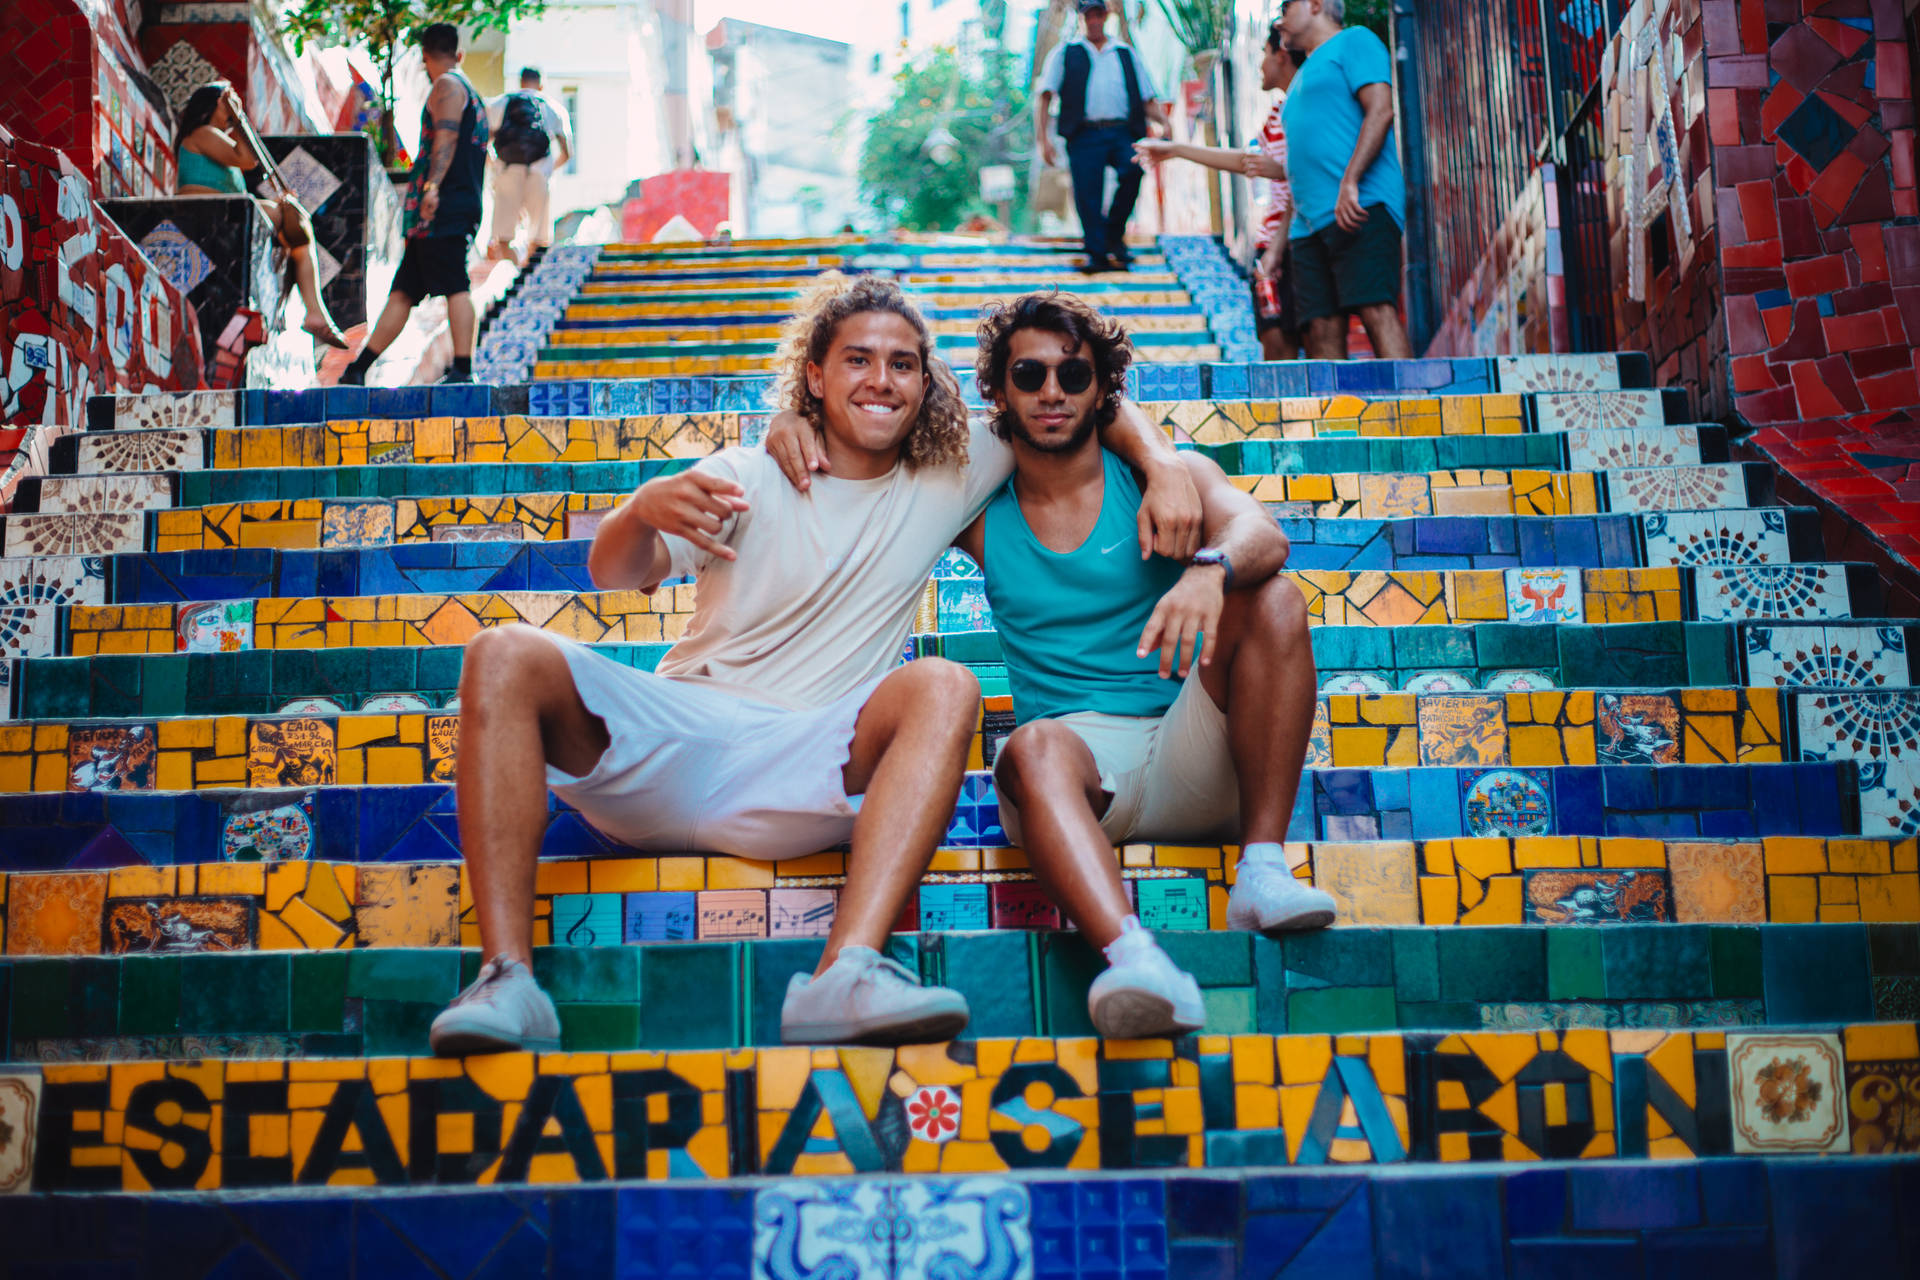 Best Friend On Lapa Stairs